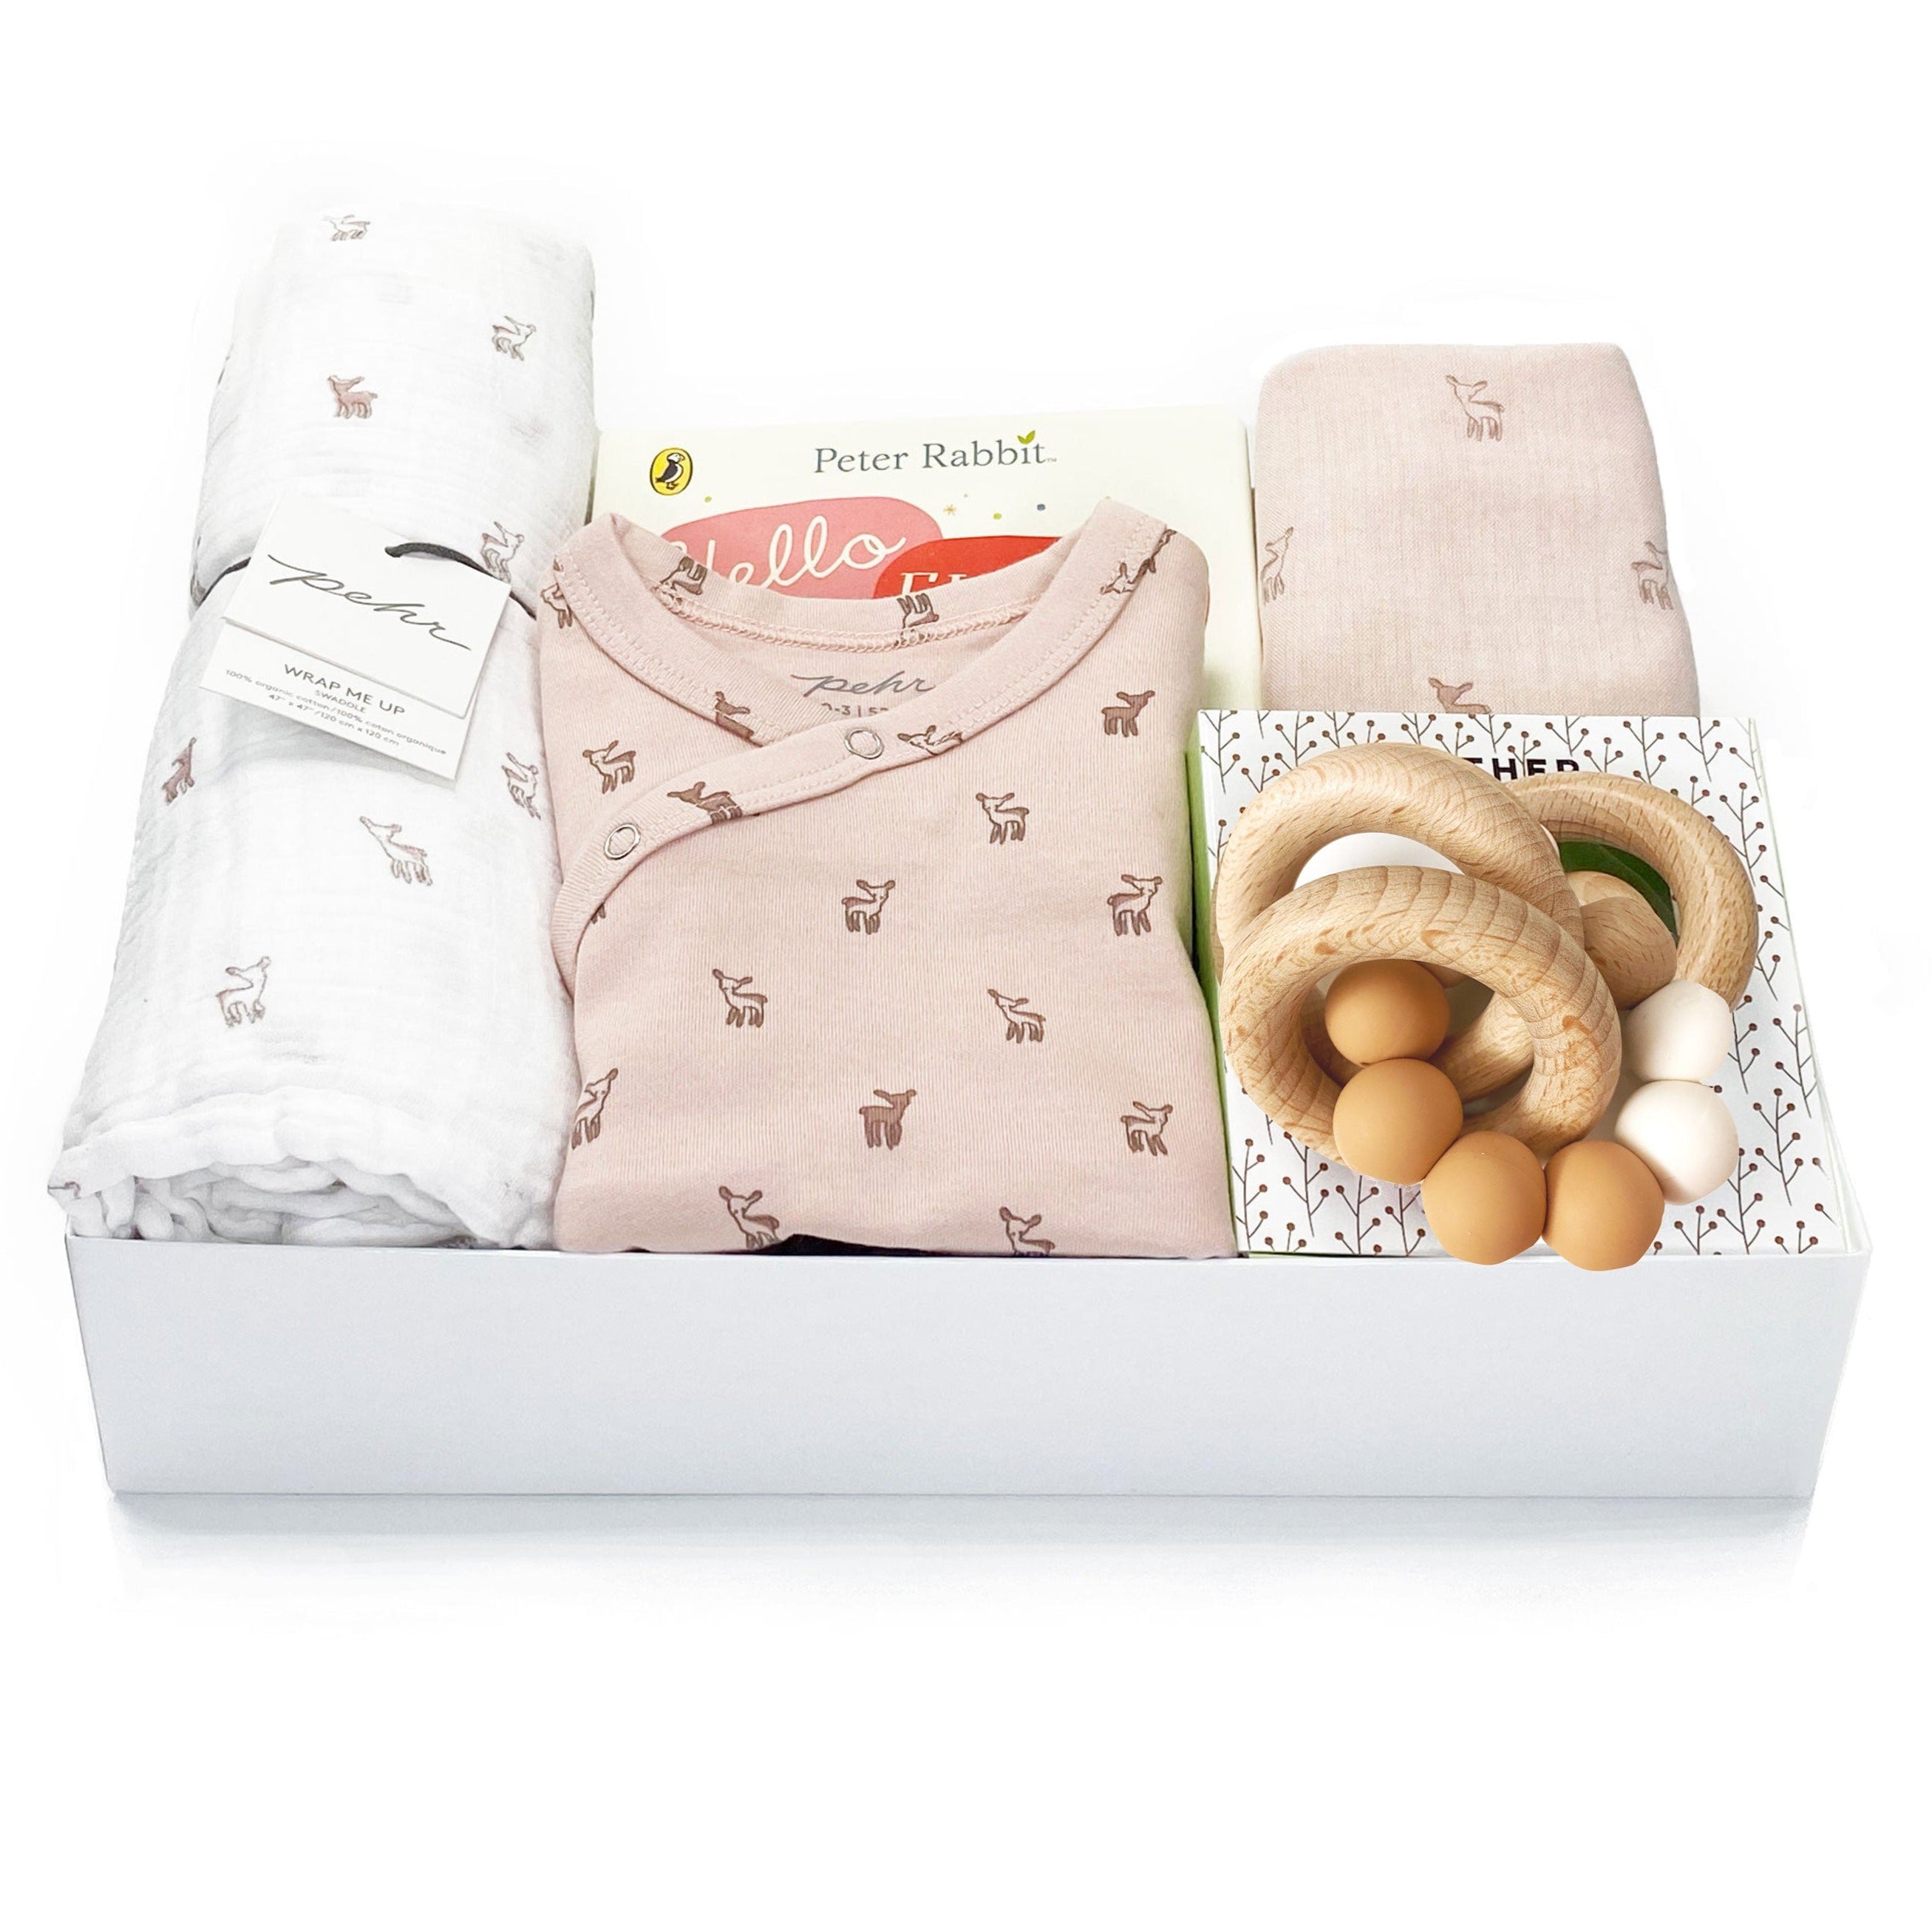 Baby Girl Gift Box featuring a Romper, a bib and a blanket by Pehr, together with a teether and a book at Bonjour Baby Baskets